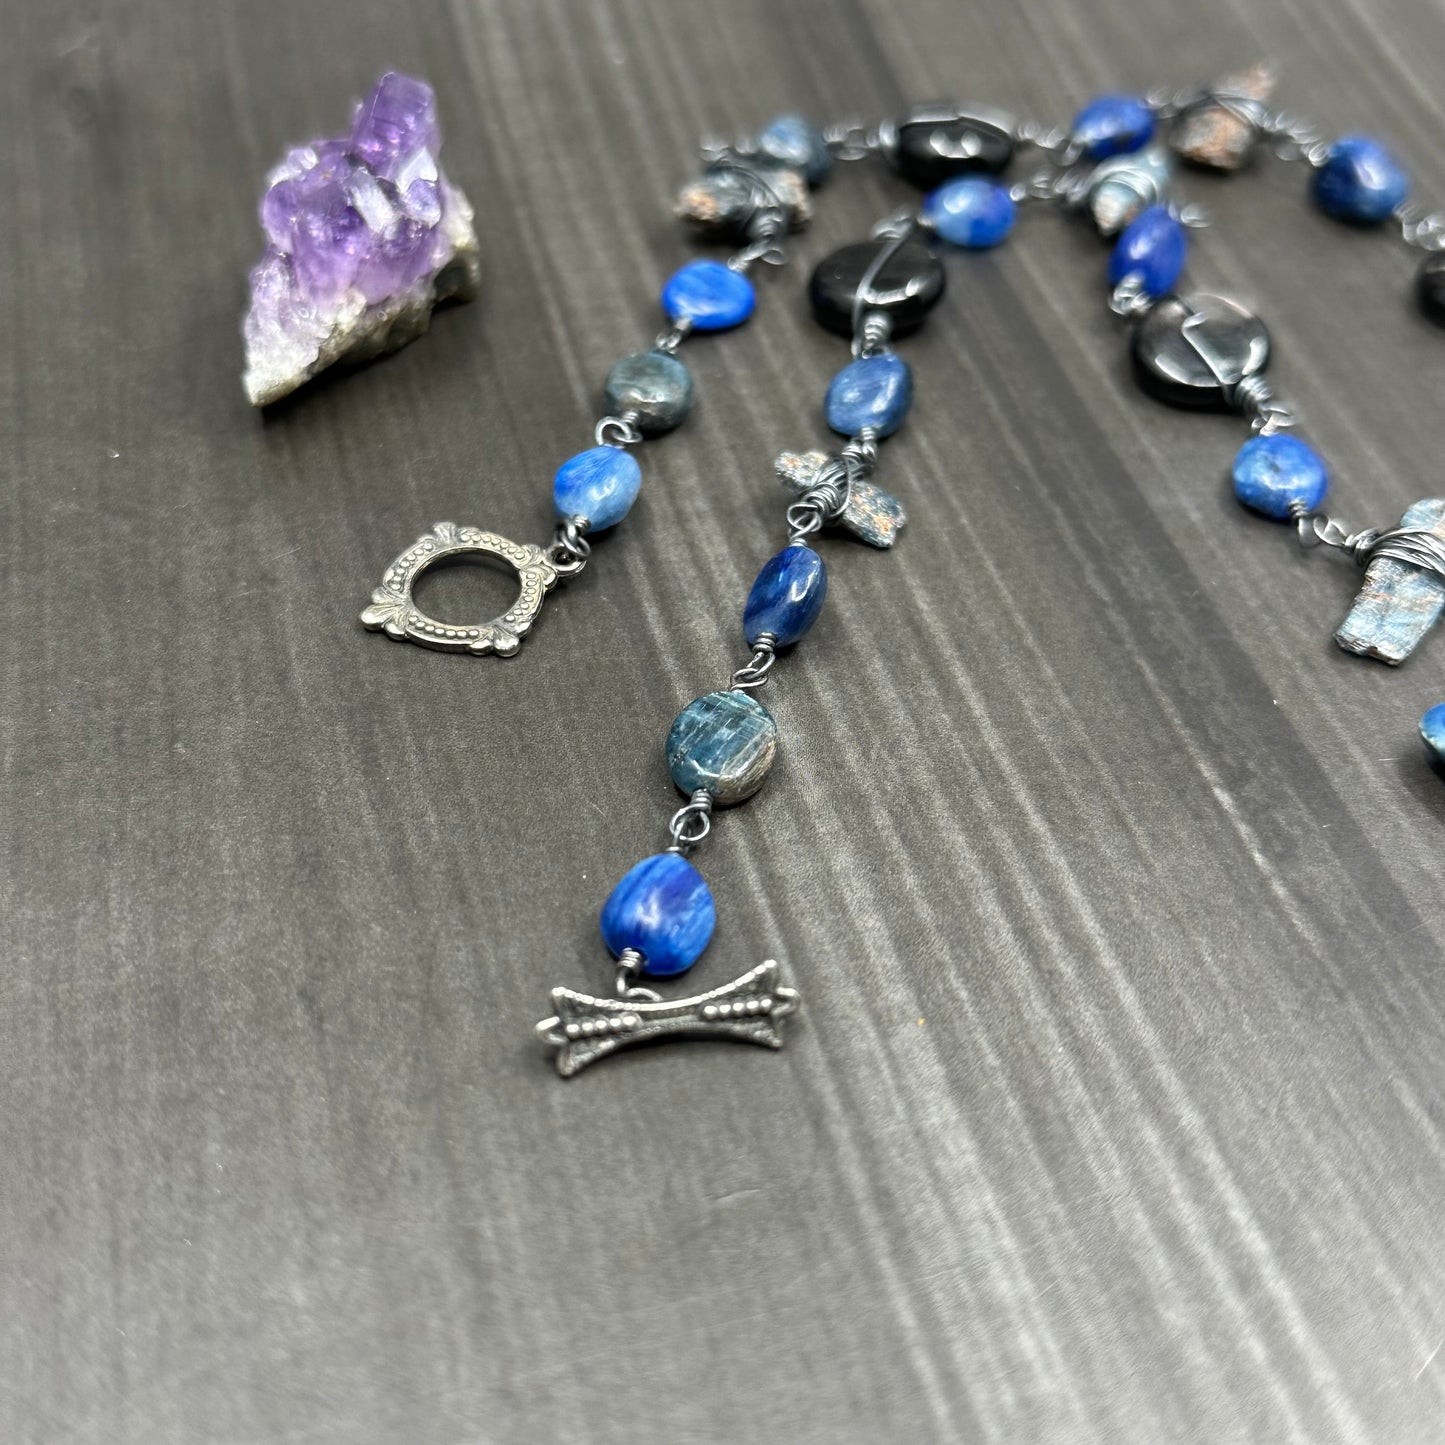 Sterling Silver, Kyanite, Hypersthene, and Ceramic Cat Necklace